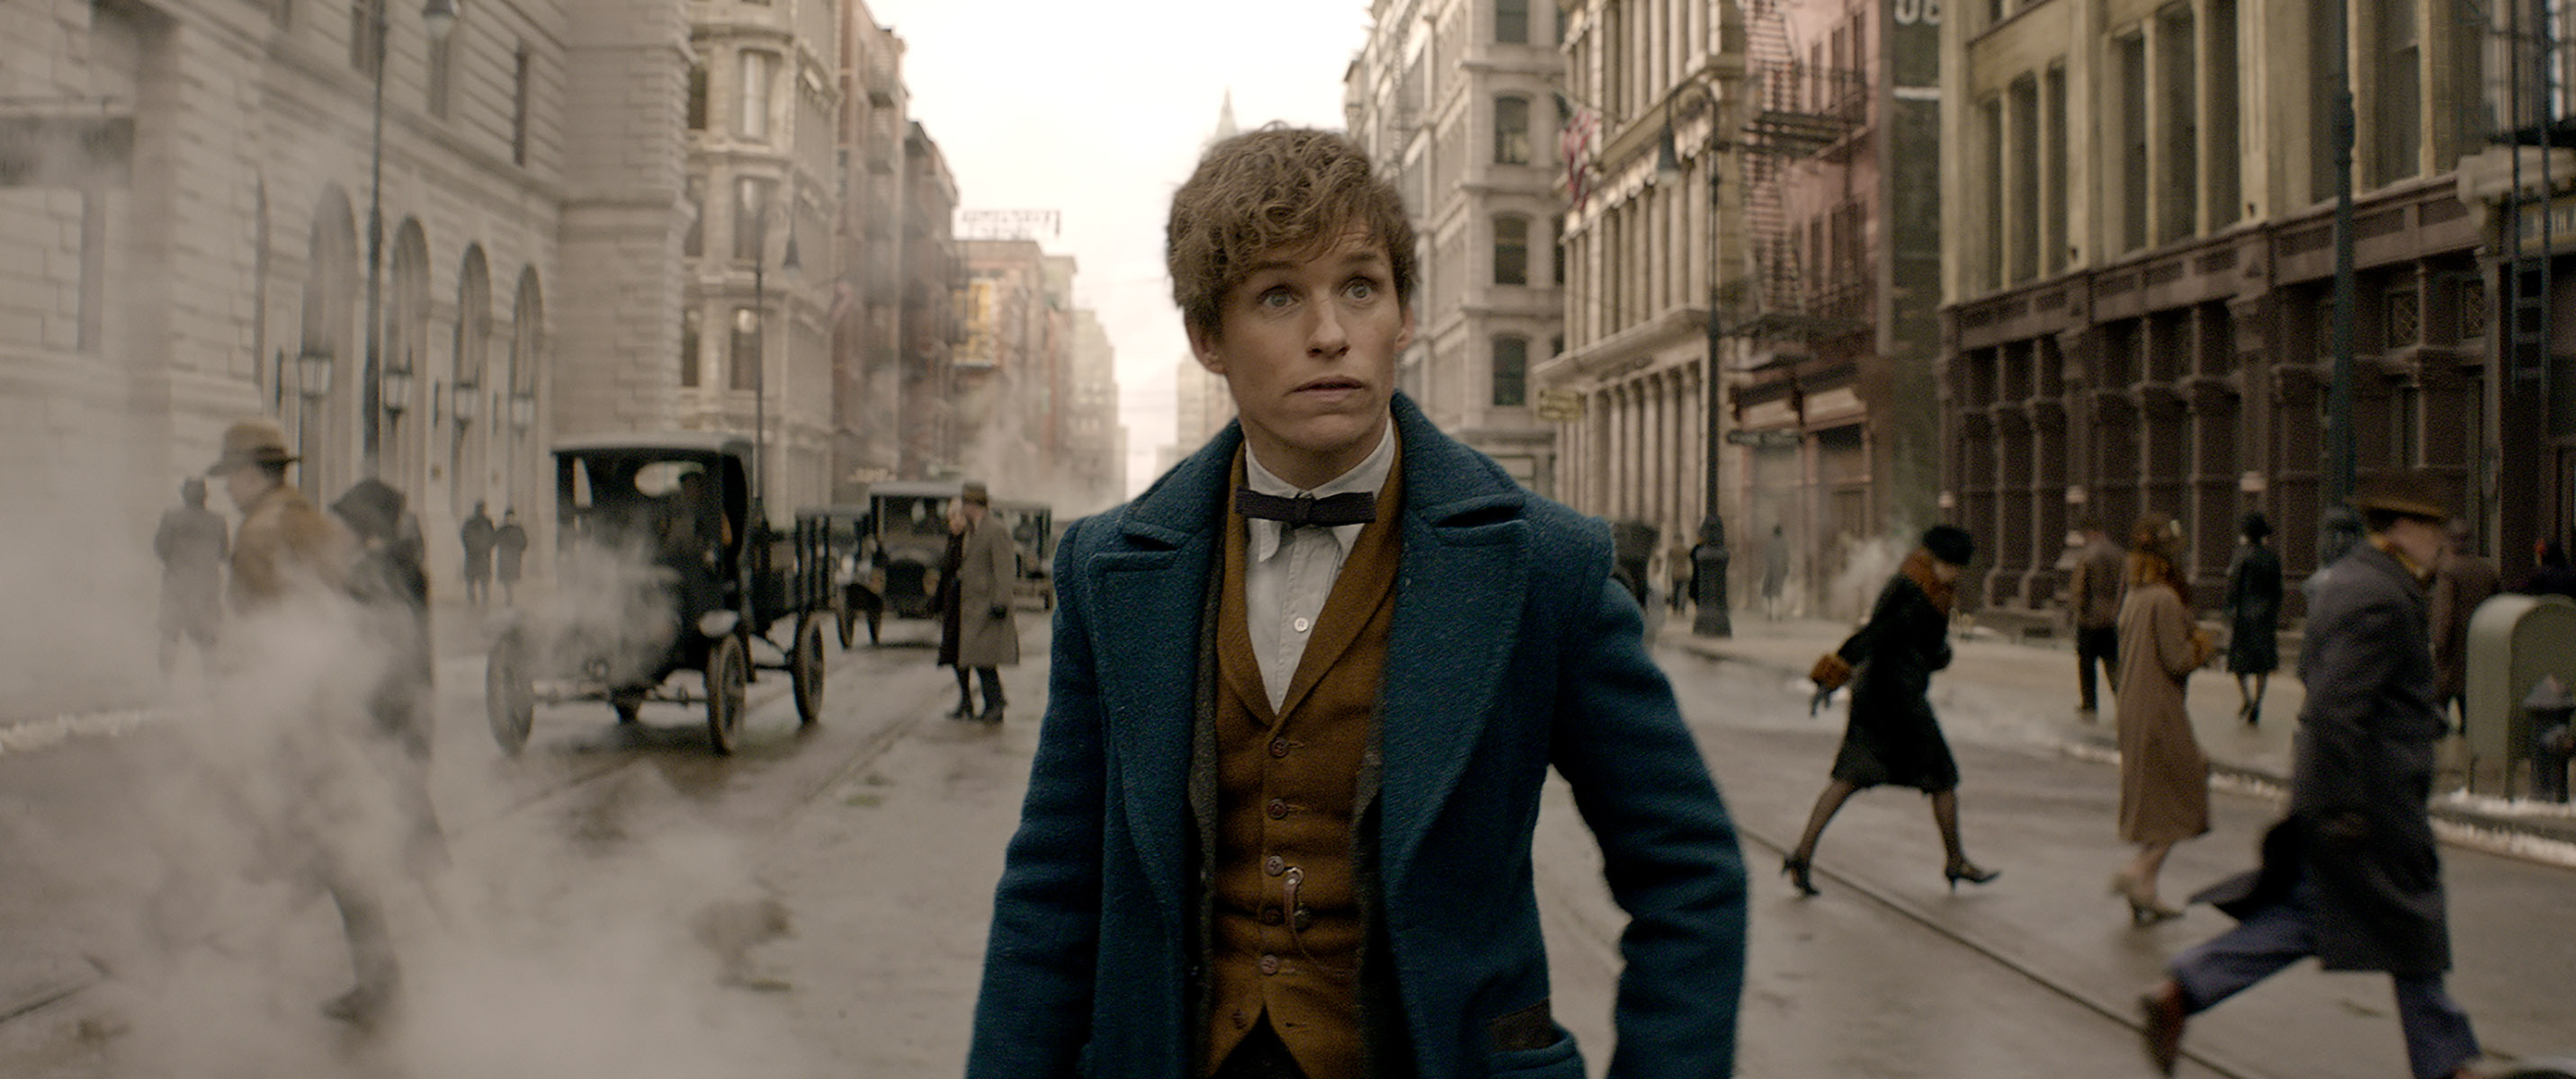 Hd 2016 Fantastic Beasts And Where To Find Them Movie Online Watch